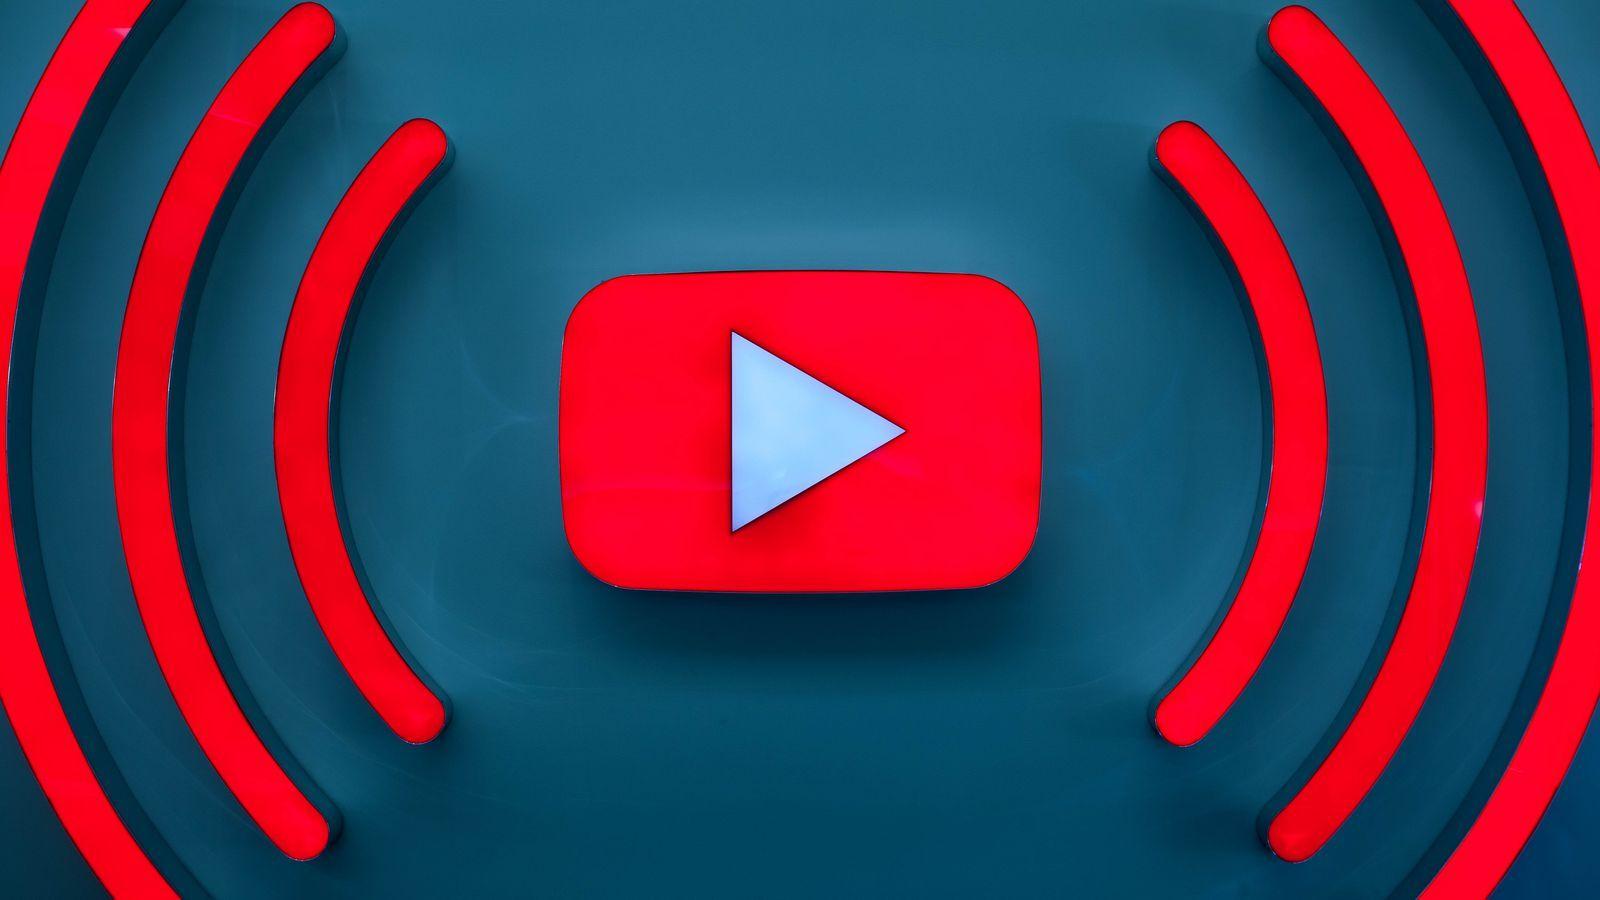 YouTube Stars Logo - YouTube stars can fess up to paid promotions easier now